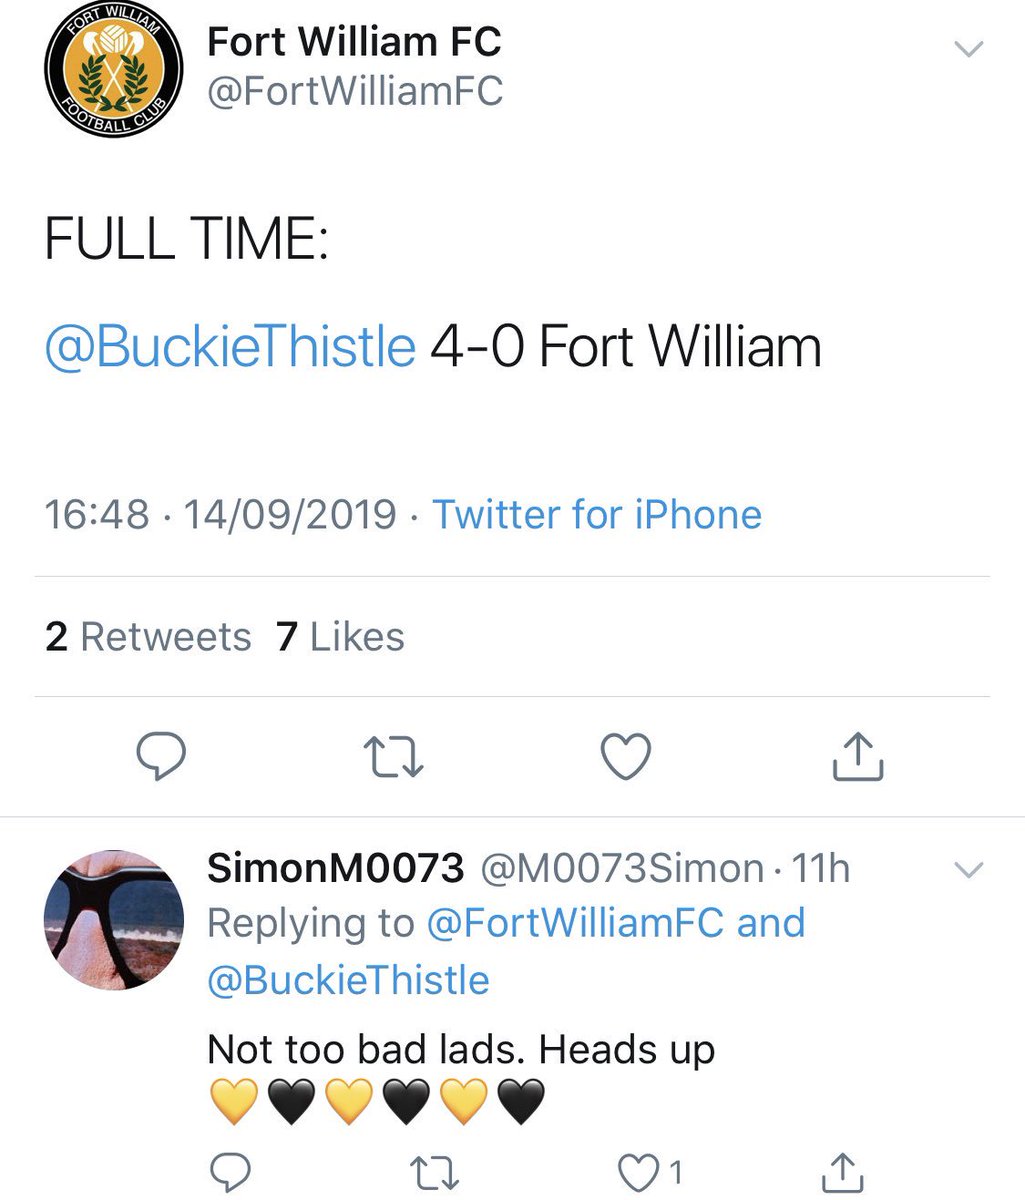 THE WEEK IN SCOTTISH FOOTBALL PATTER 2019/20: Vol. 6